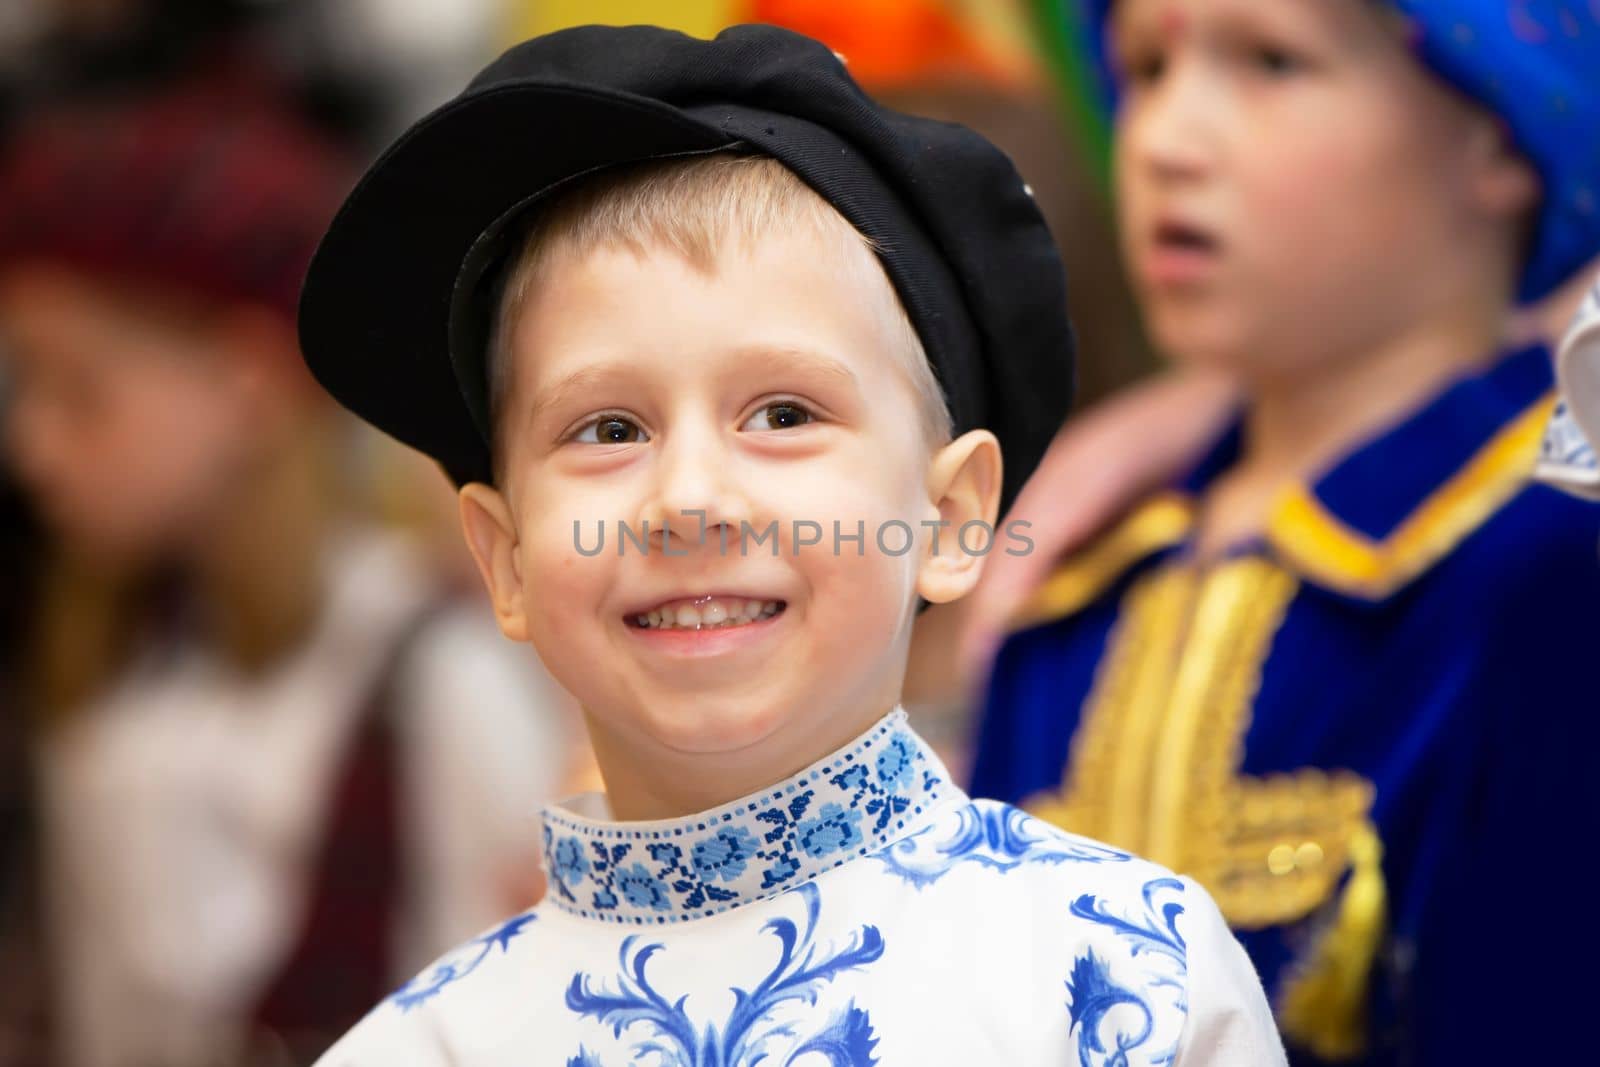 Belarus, city of Gomel, May 21, 2021 Children's holiday in the city. Little boy in Russian national costume and headdress.